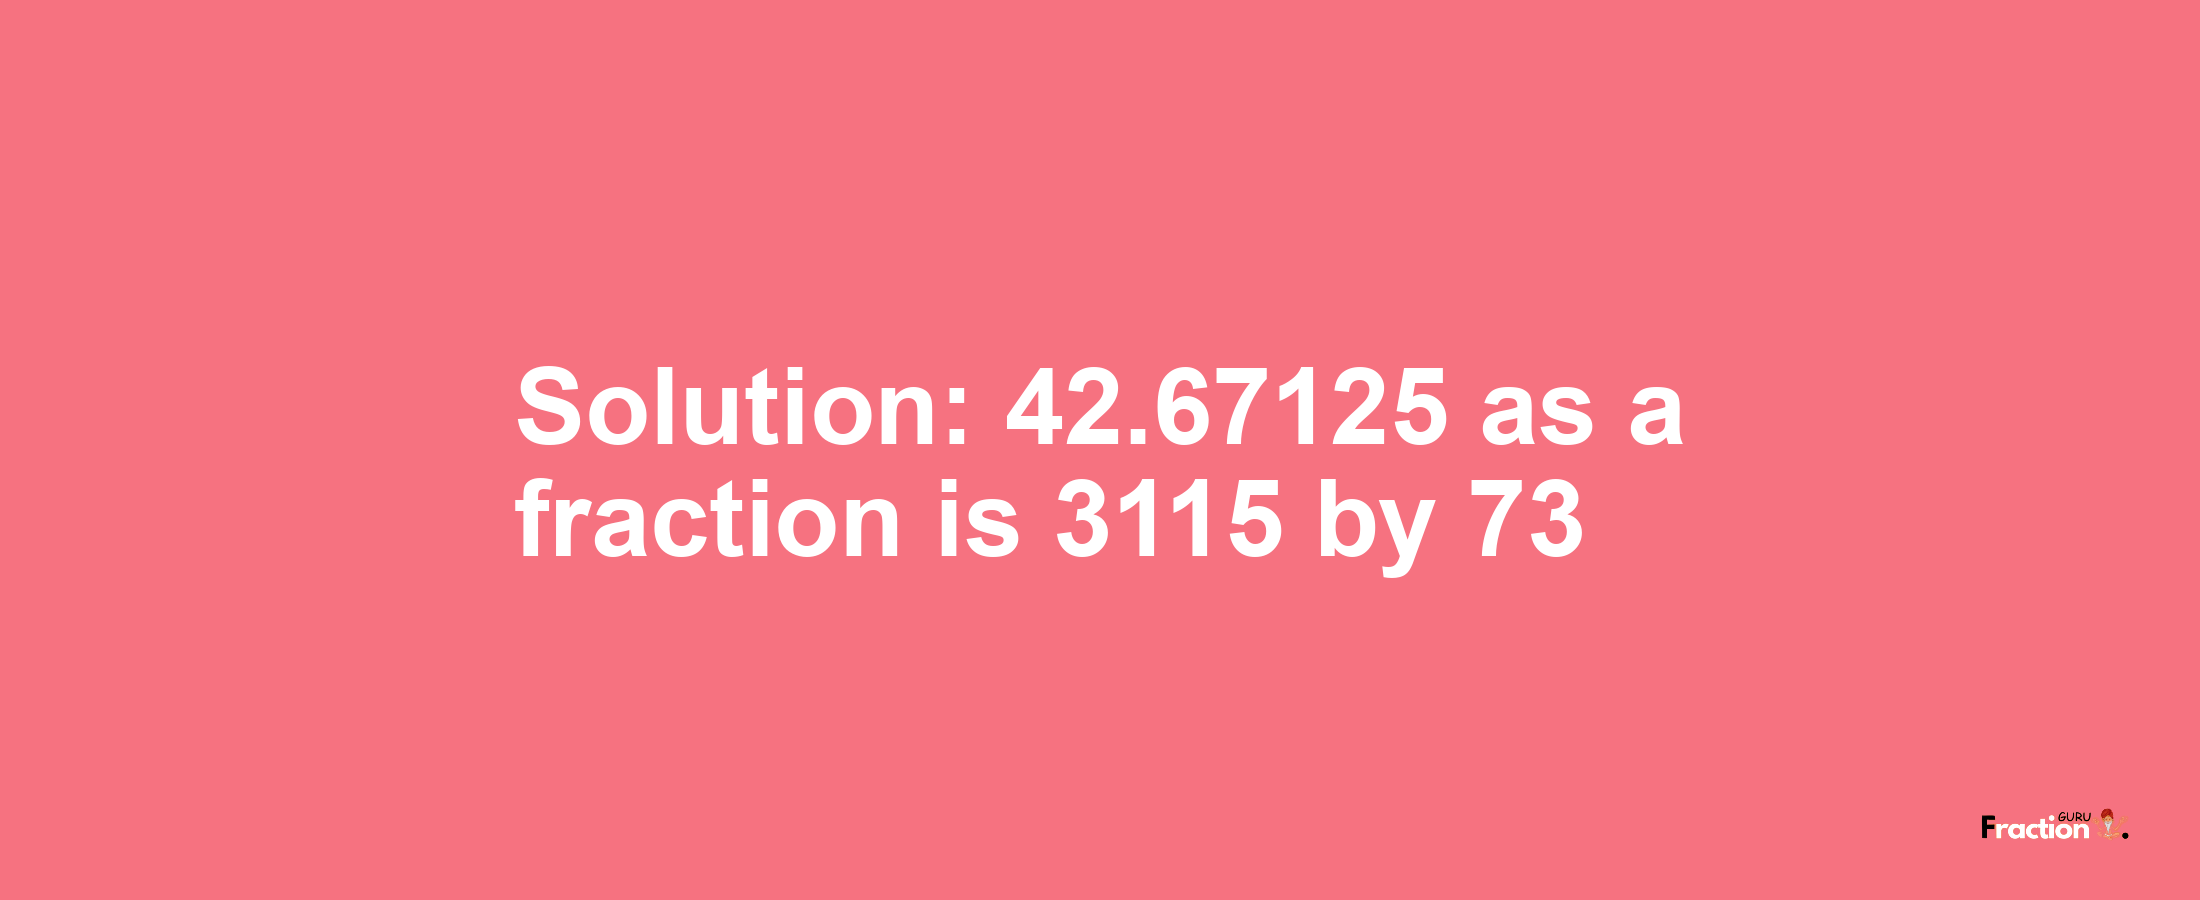 Solution:42.67125 as a fraction is 3115/73